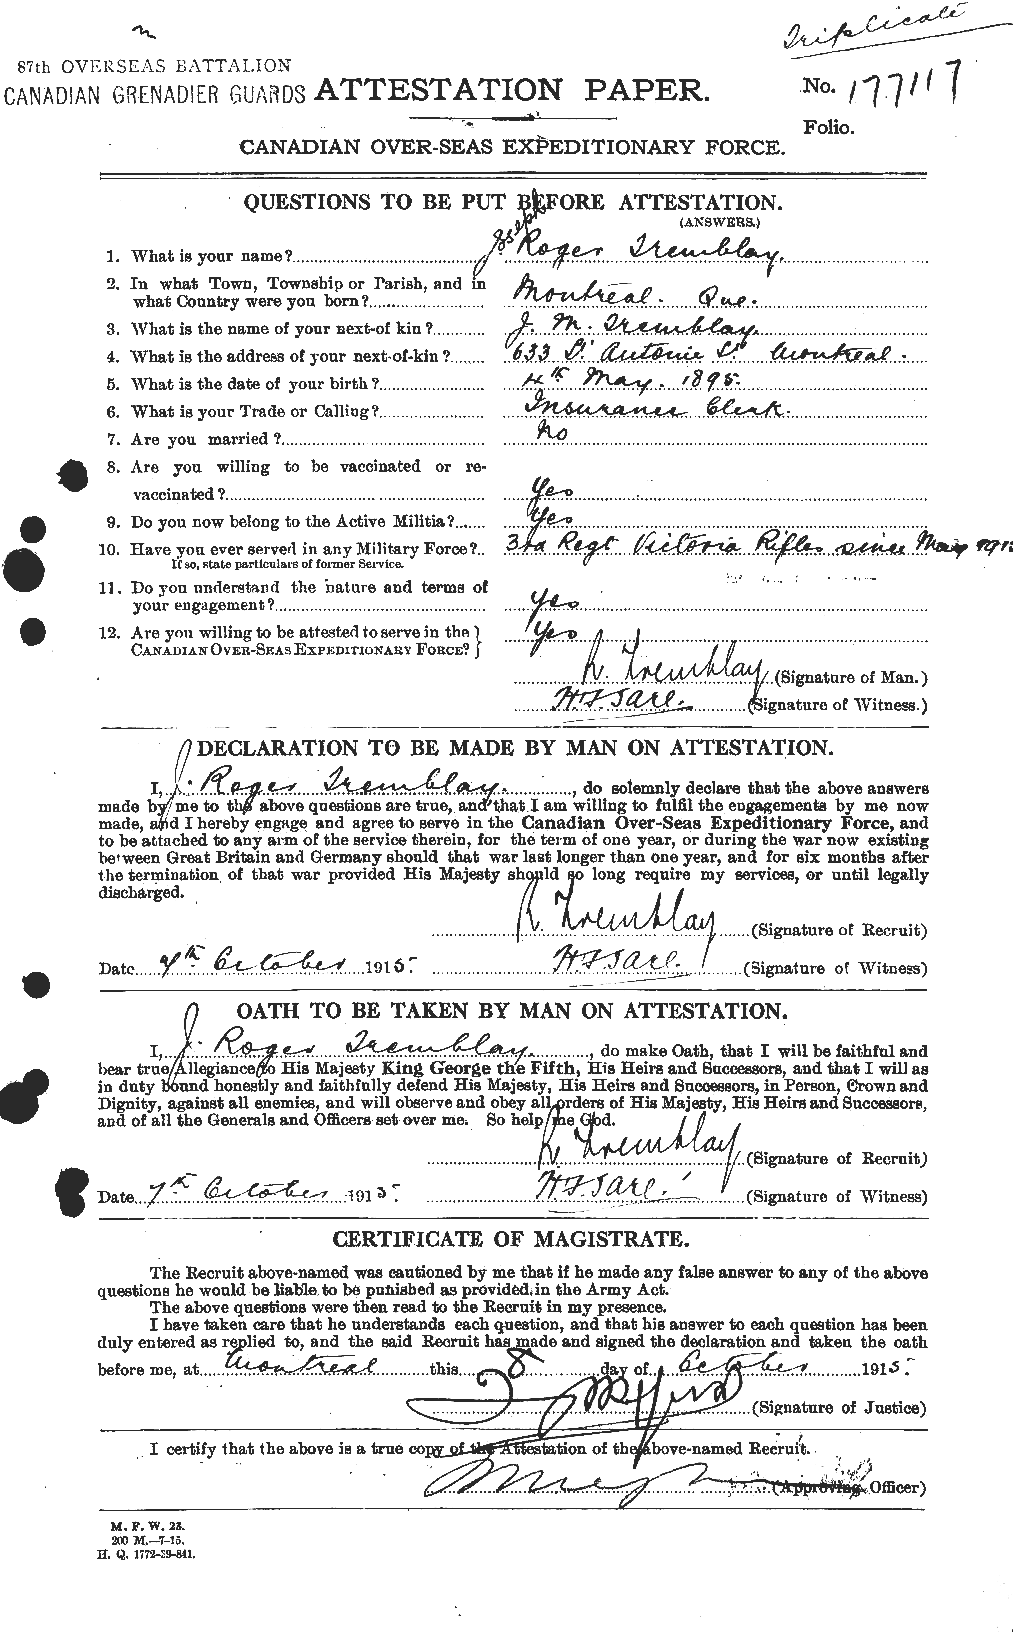 Personnel Records of the First World War - CEF 639168a